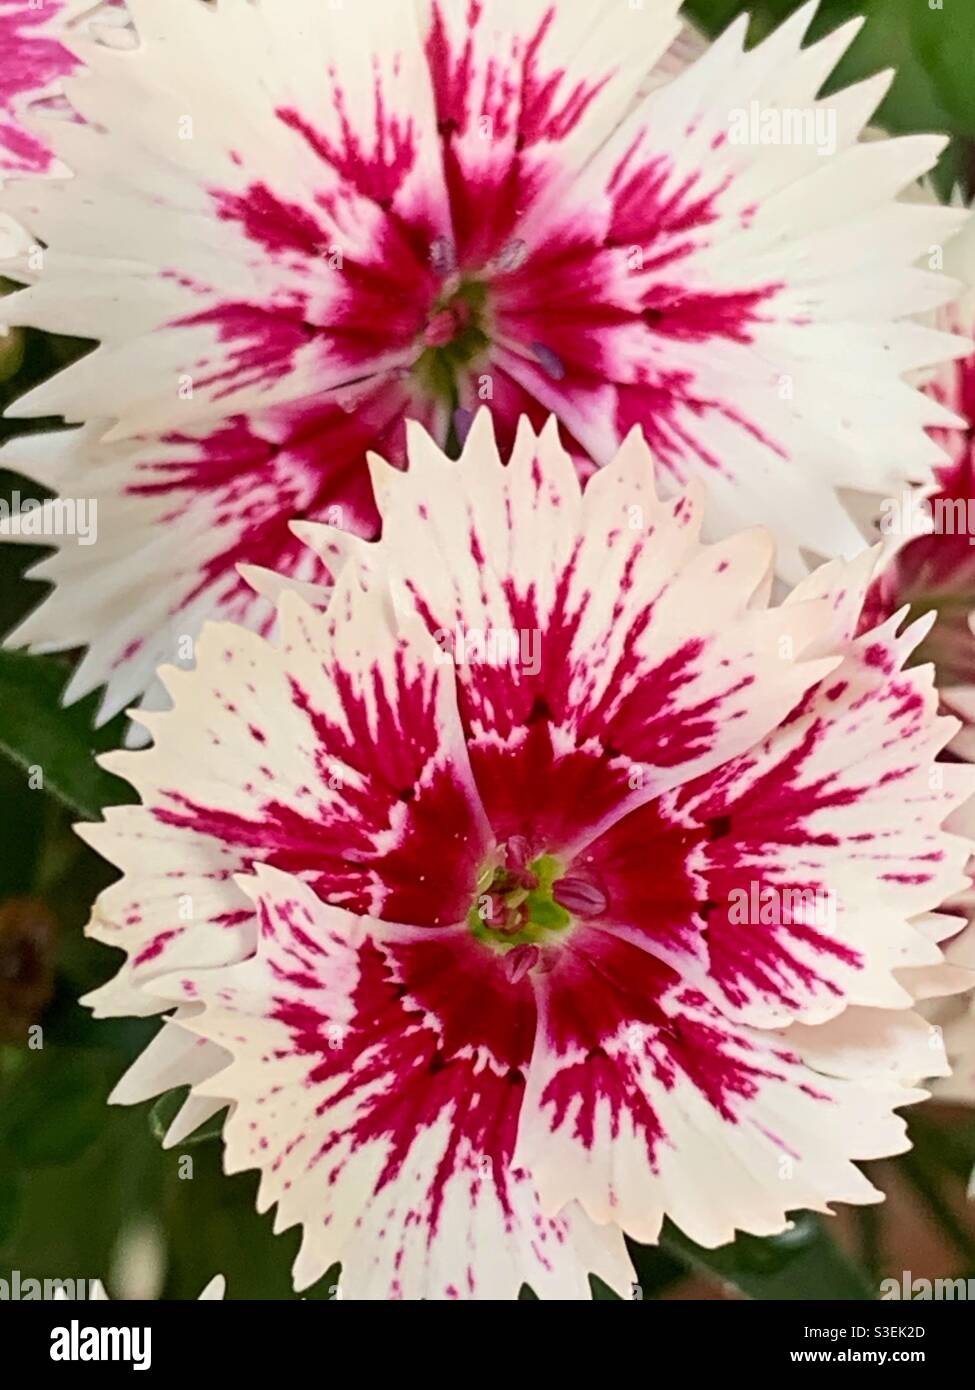 White and pink dianthus flowers Stock Photo